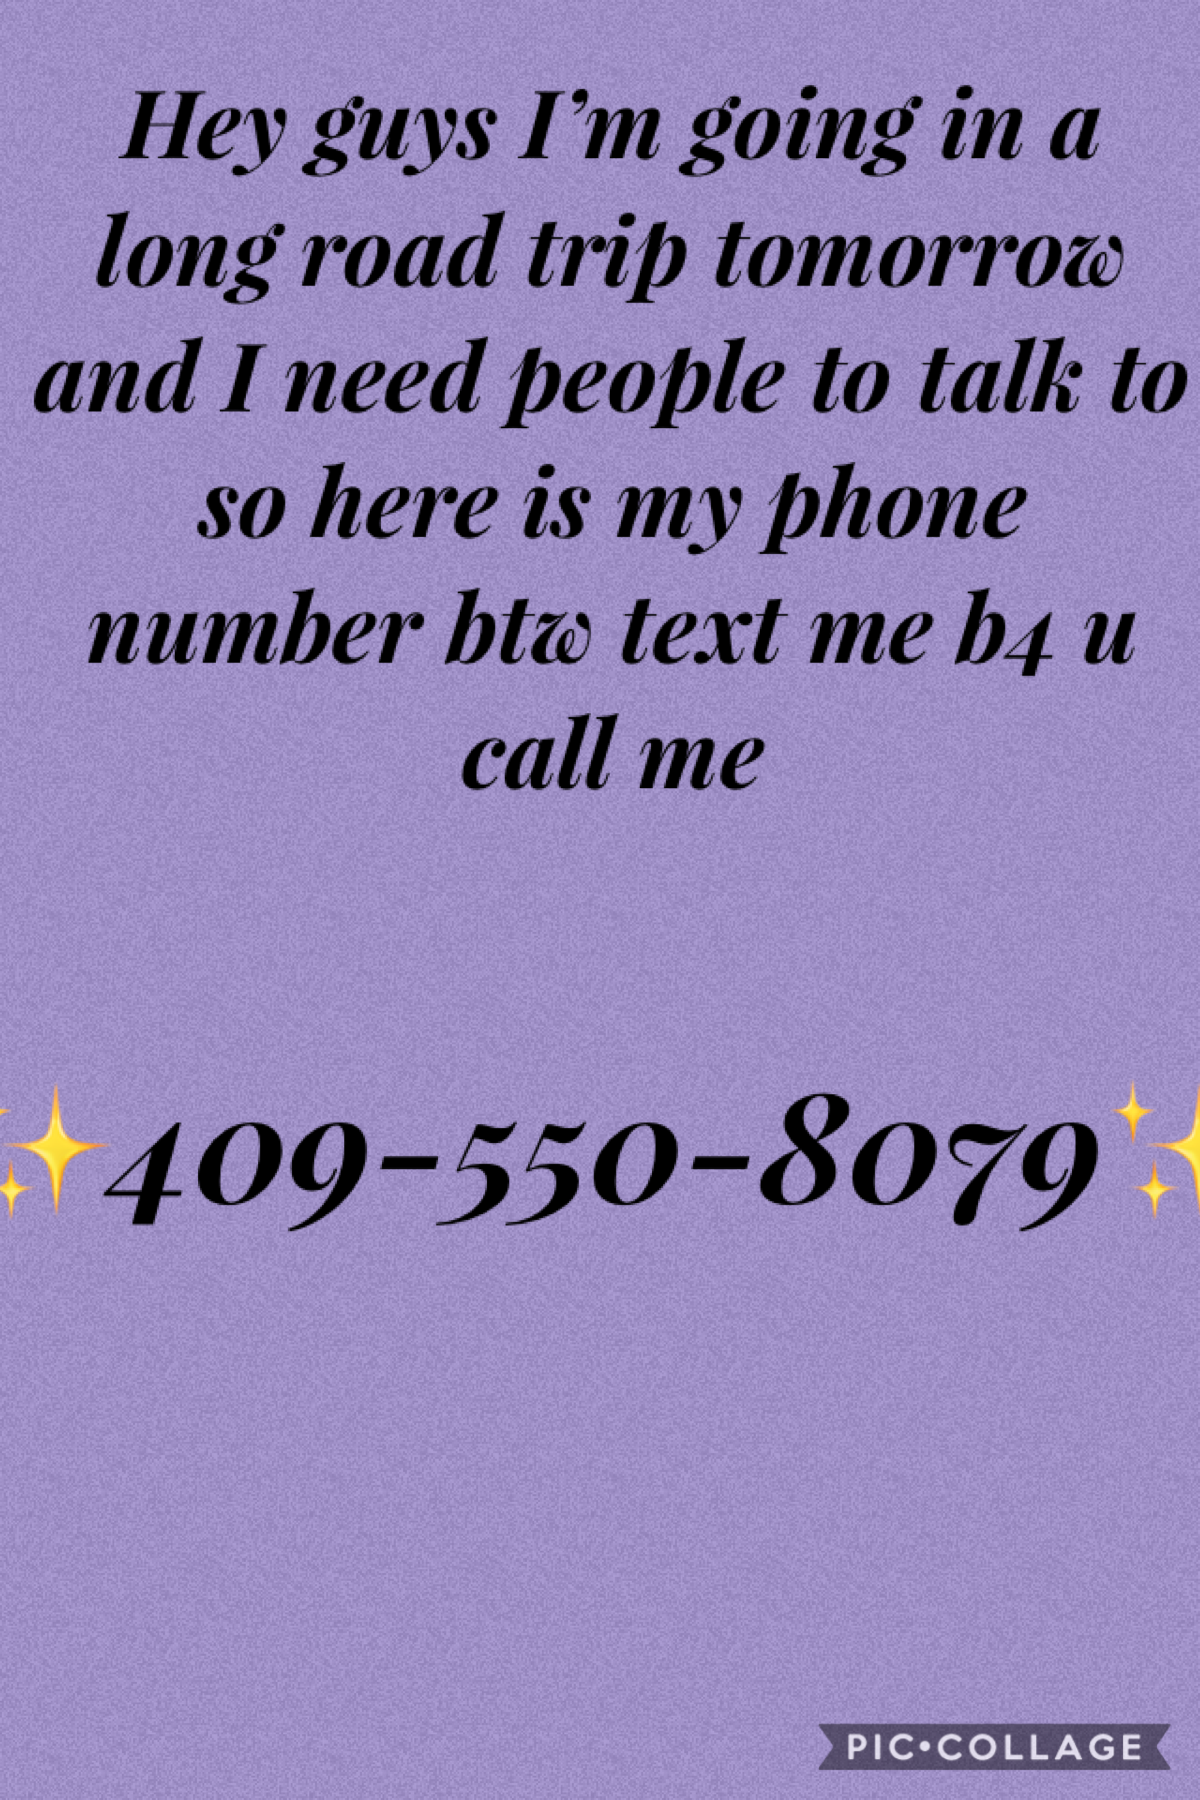 Here is my phone number